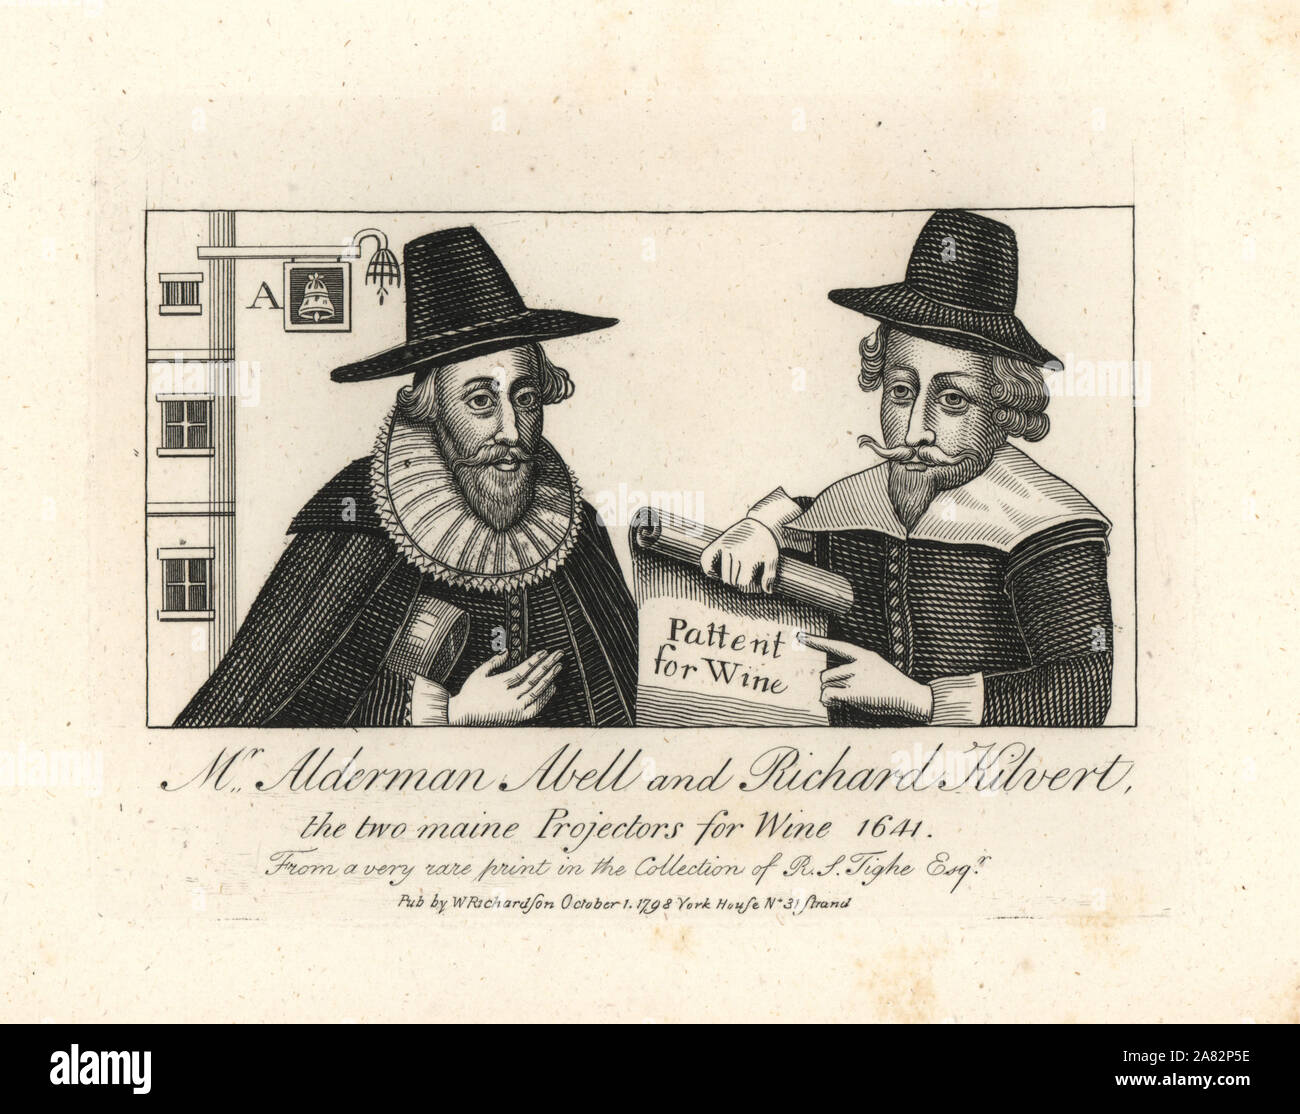 Alderman William Abell and Richard Kilvert, founders of the unpopular Vintners' Company, 1641. Copperplate engraving from William Richardson's Portraits Illustrating Granger's Biographical History of England, London, 1792–1812. James Granger (1723–1776) was an English clergyman, biographer, and print collector. Stock Photo